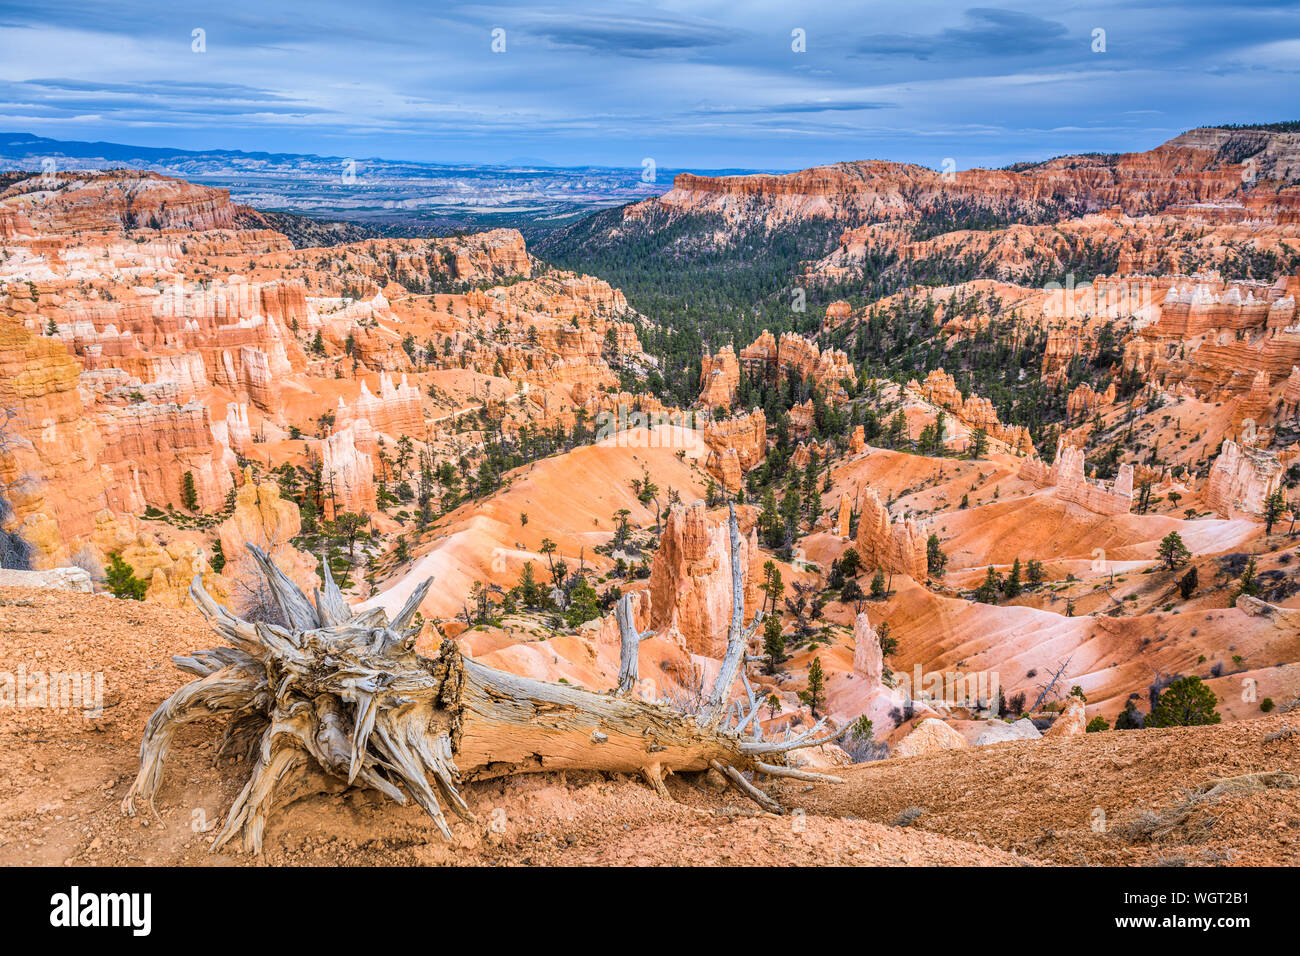 Bryce Canyon National Park, Utah, USA with a tree on the rim. Stock Photo